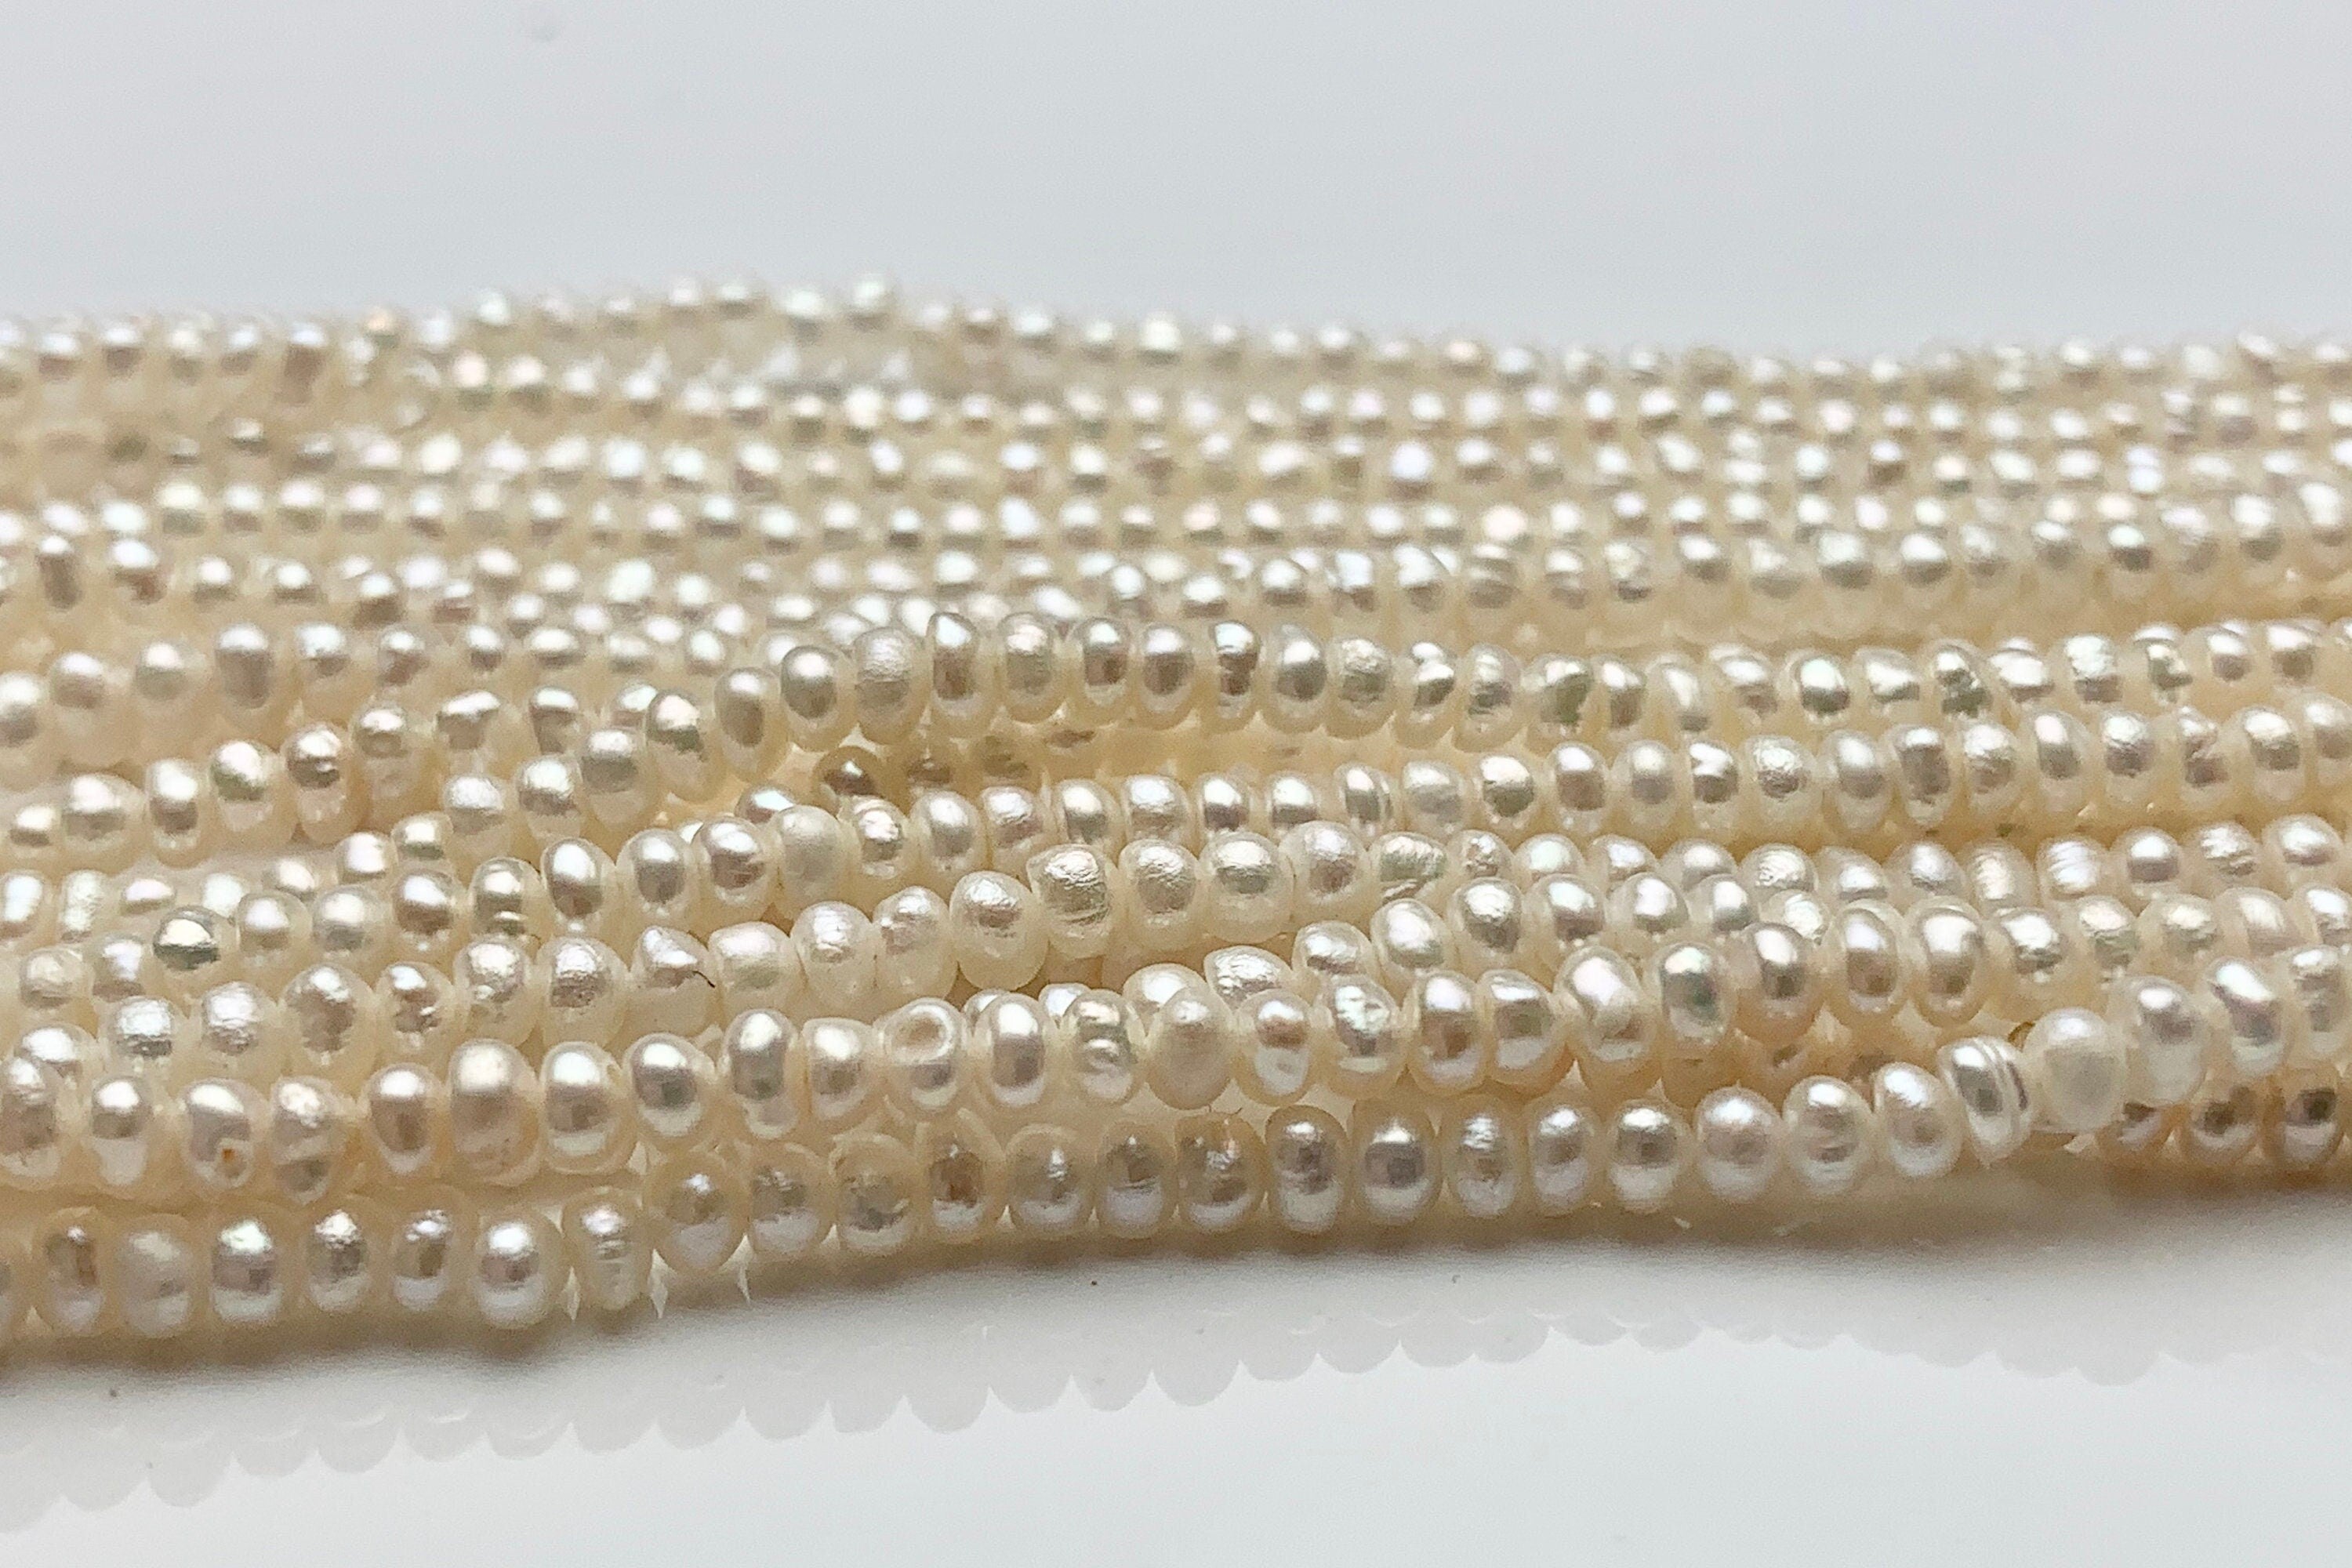 1.5-2mm Tiny Freshwater Pearl Beads Seed Pearls Natural White Freshwater  Potato Pearl Beads Tiny Seed Pearls P1045 